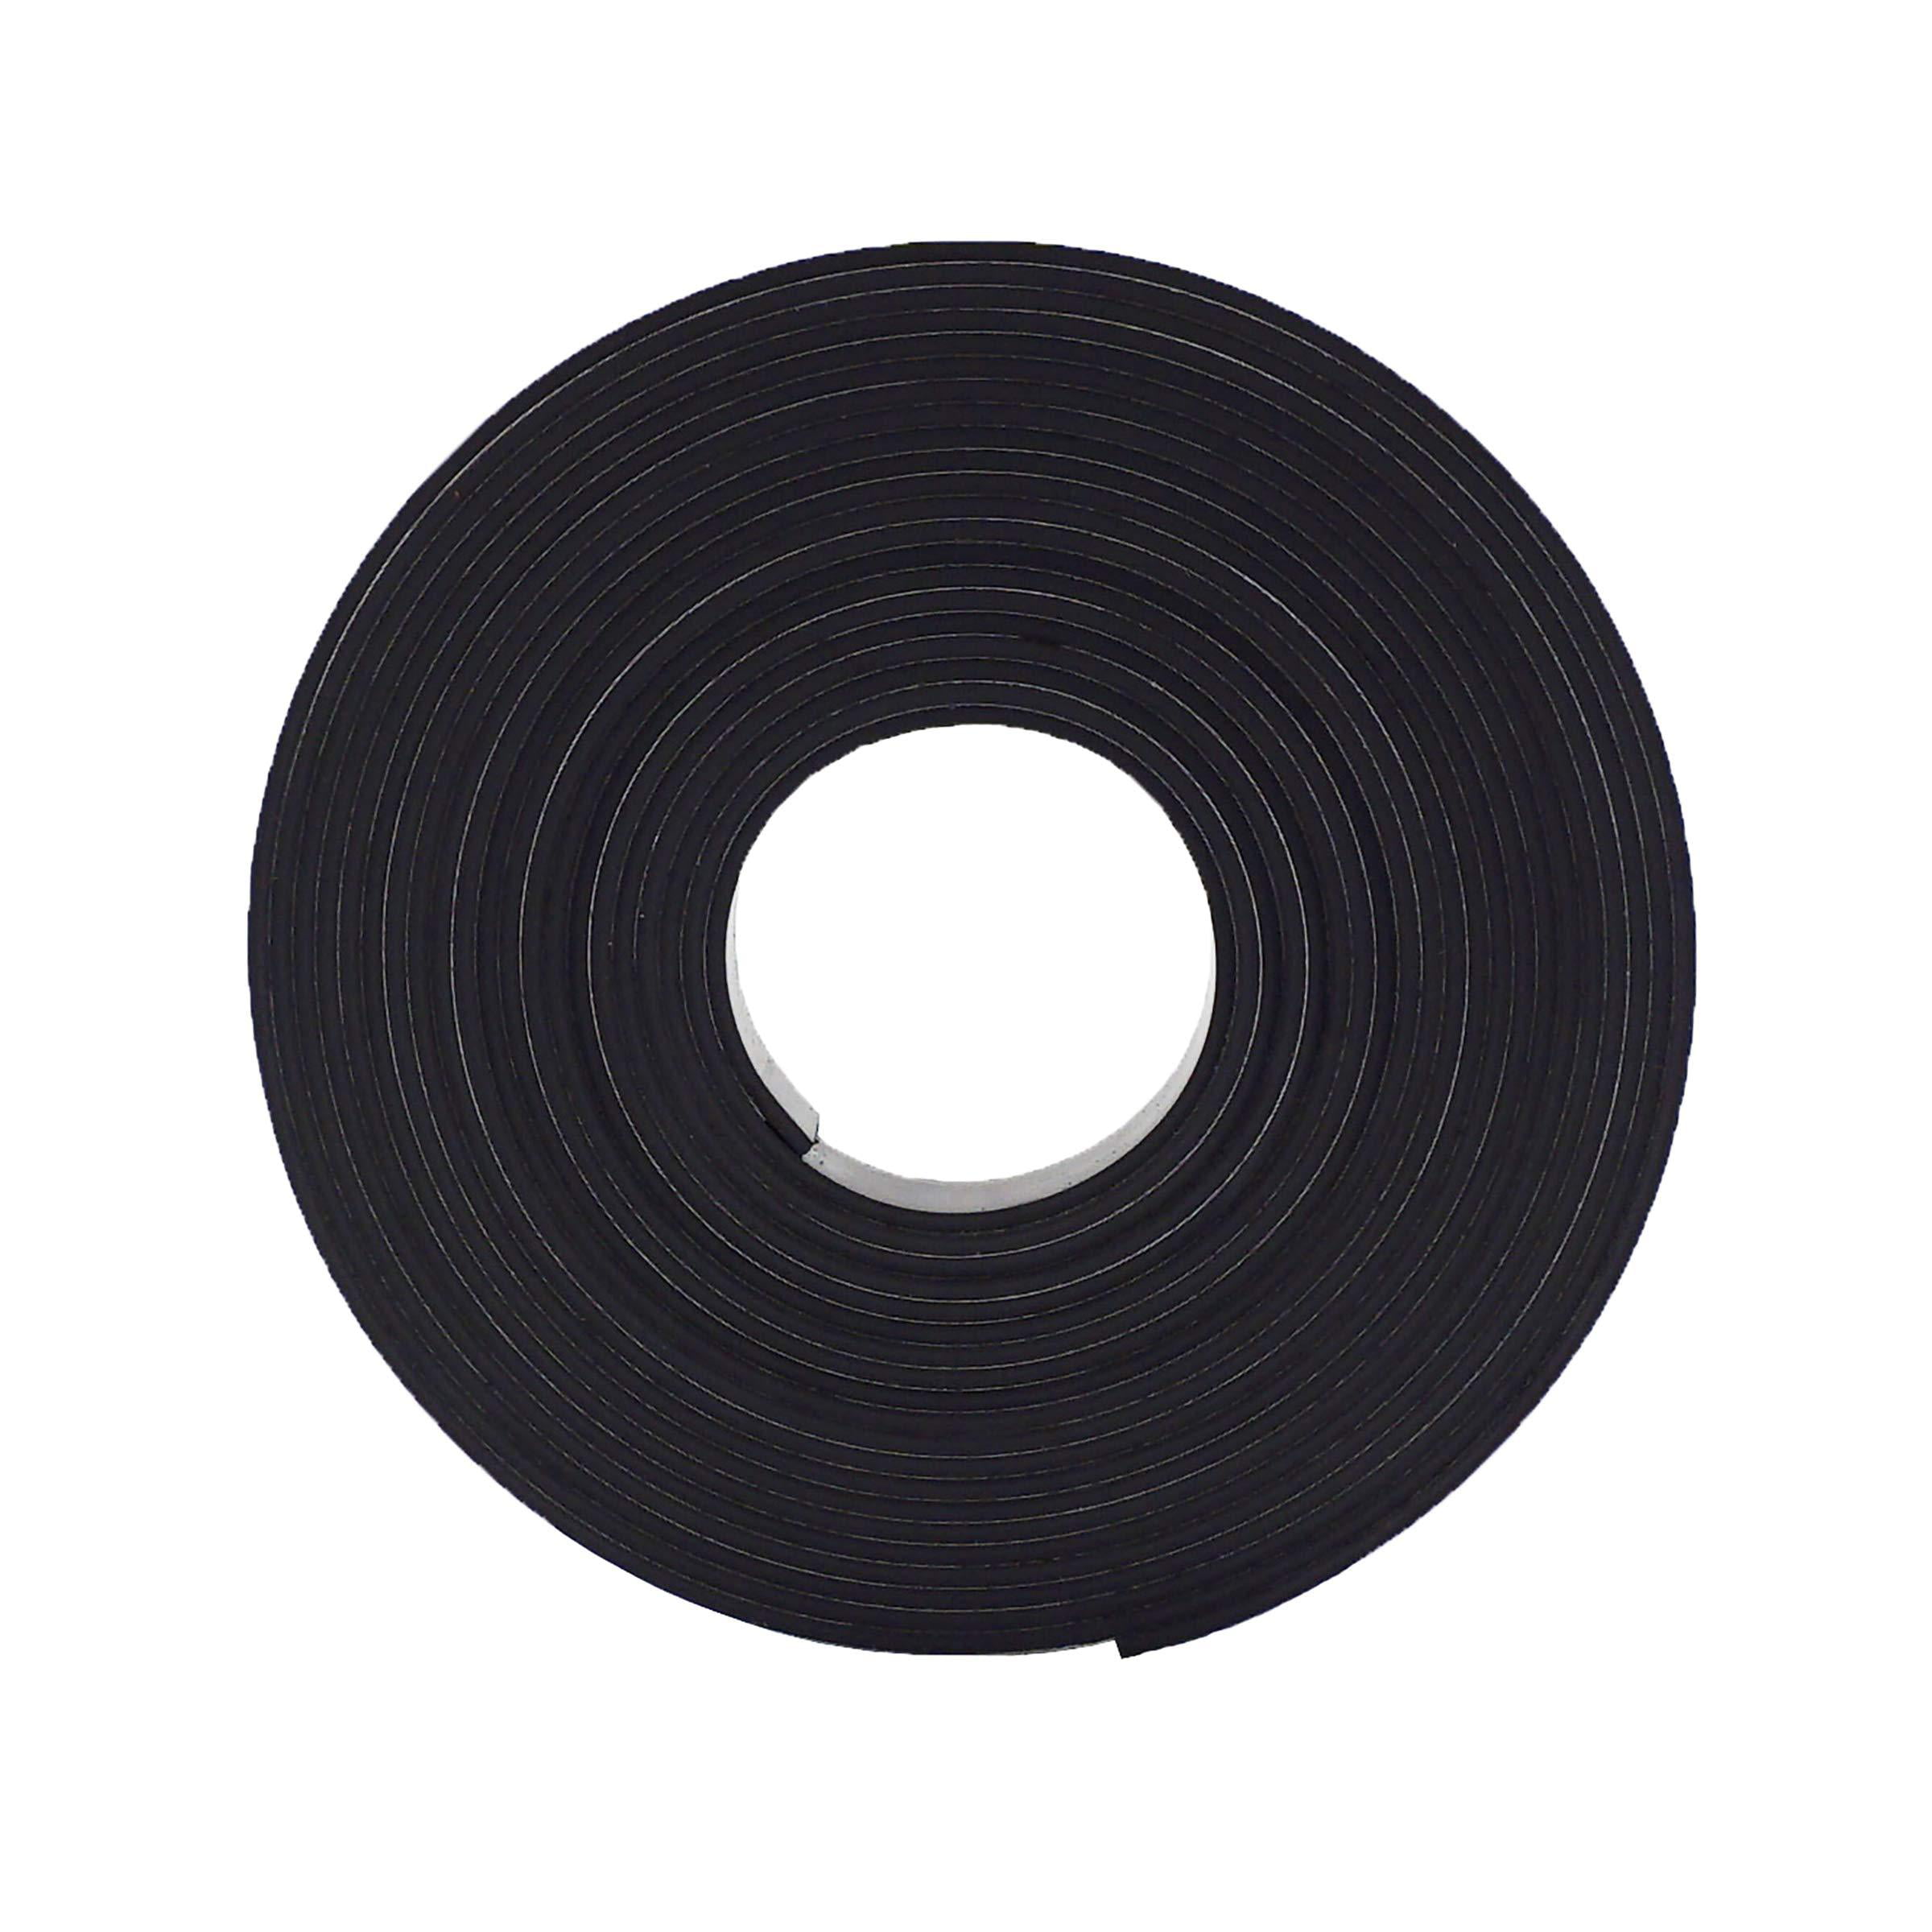 Master Magnetics Flexible Magnet Strip with White Vinyl Coating, 1/32  Thick, 1 Height, 200 Feet, Scored Every 6, 1 Roll with 398-1 x 6